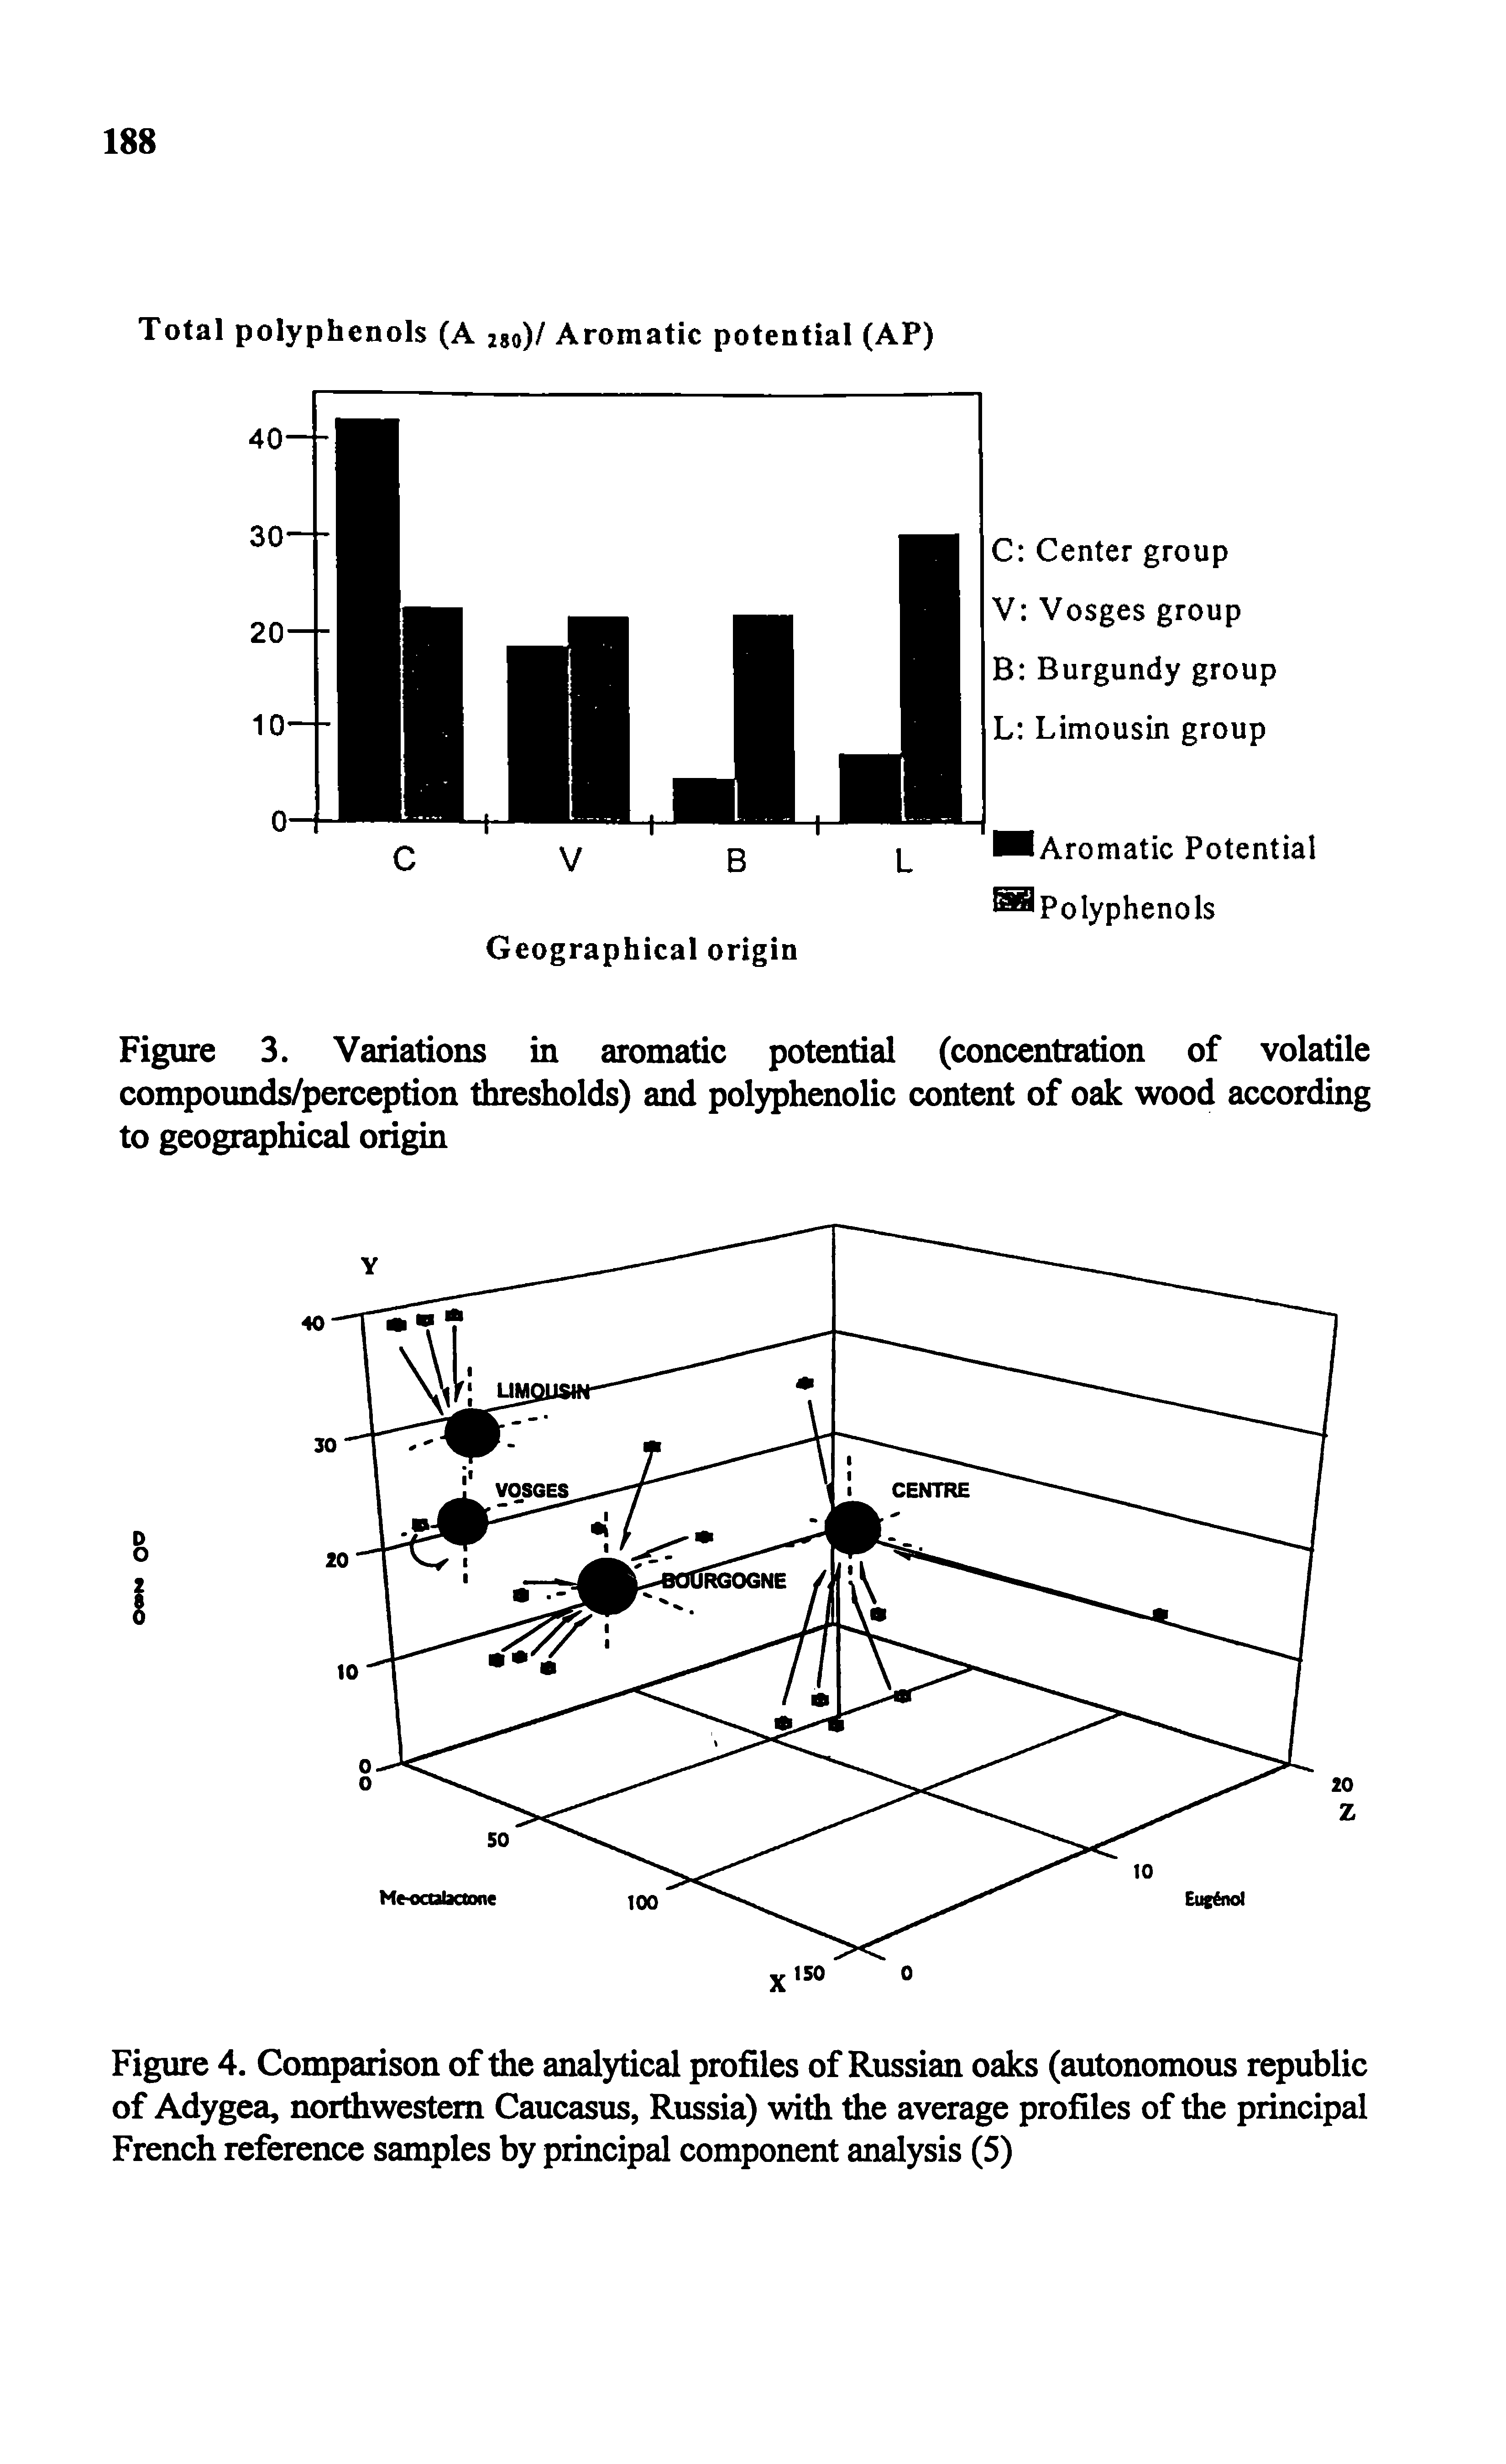 Figure 3. Variations in aromatic potential (concentration of volatile compounds/perception thresholds) and polyphenolic content of oak wood according to geographical origin...